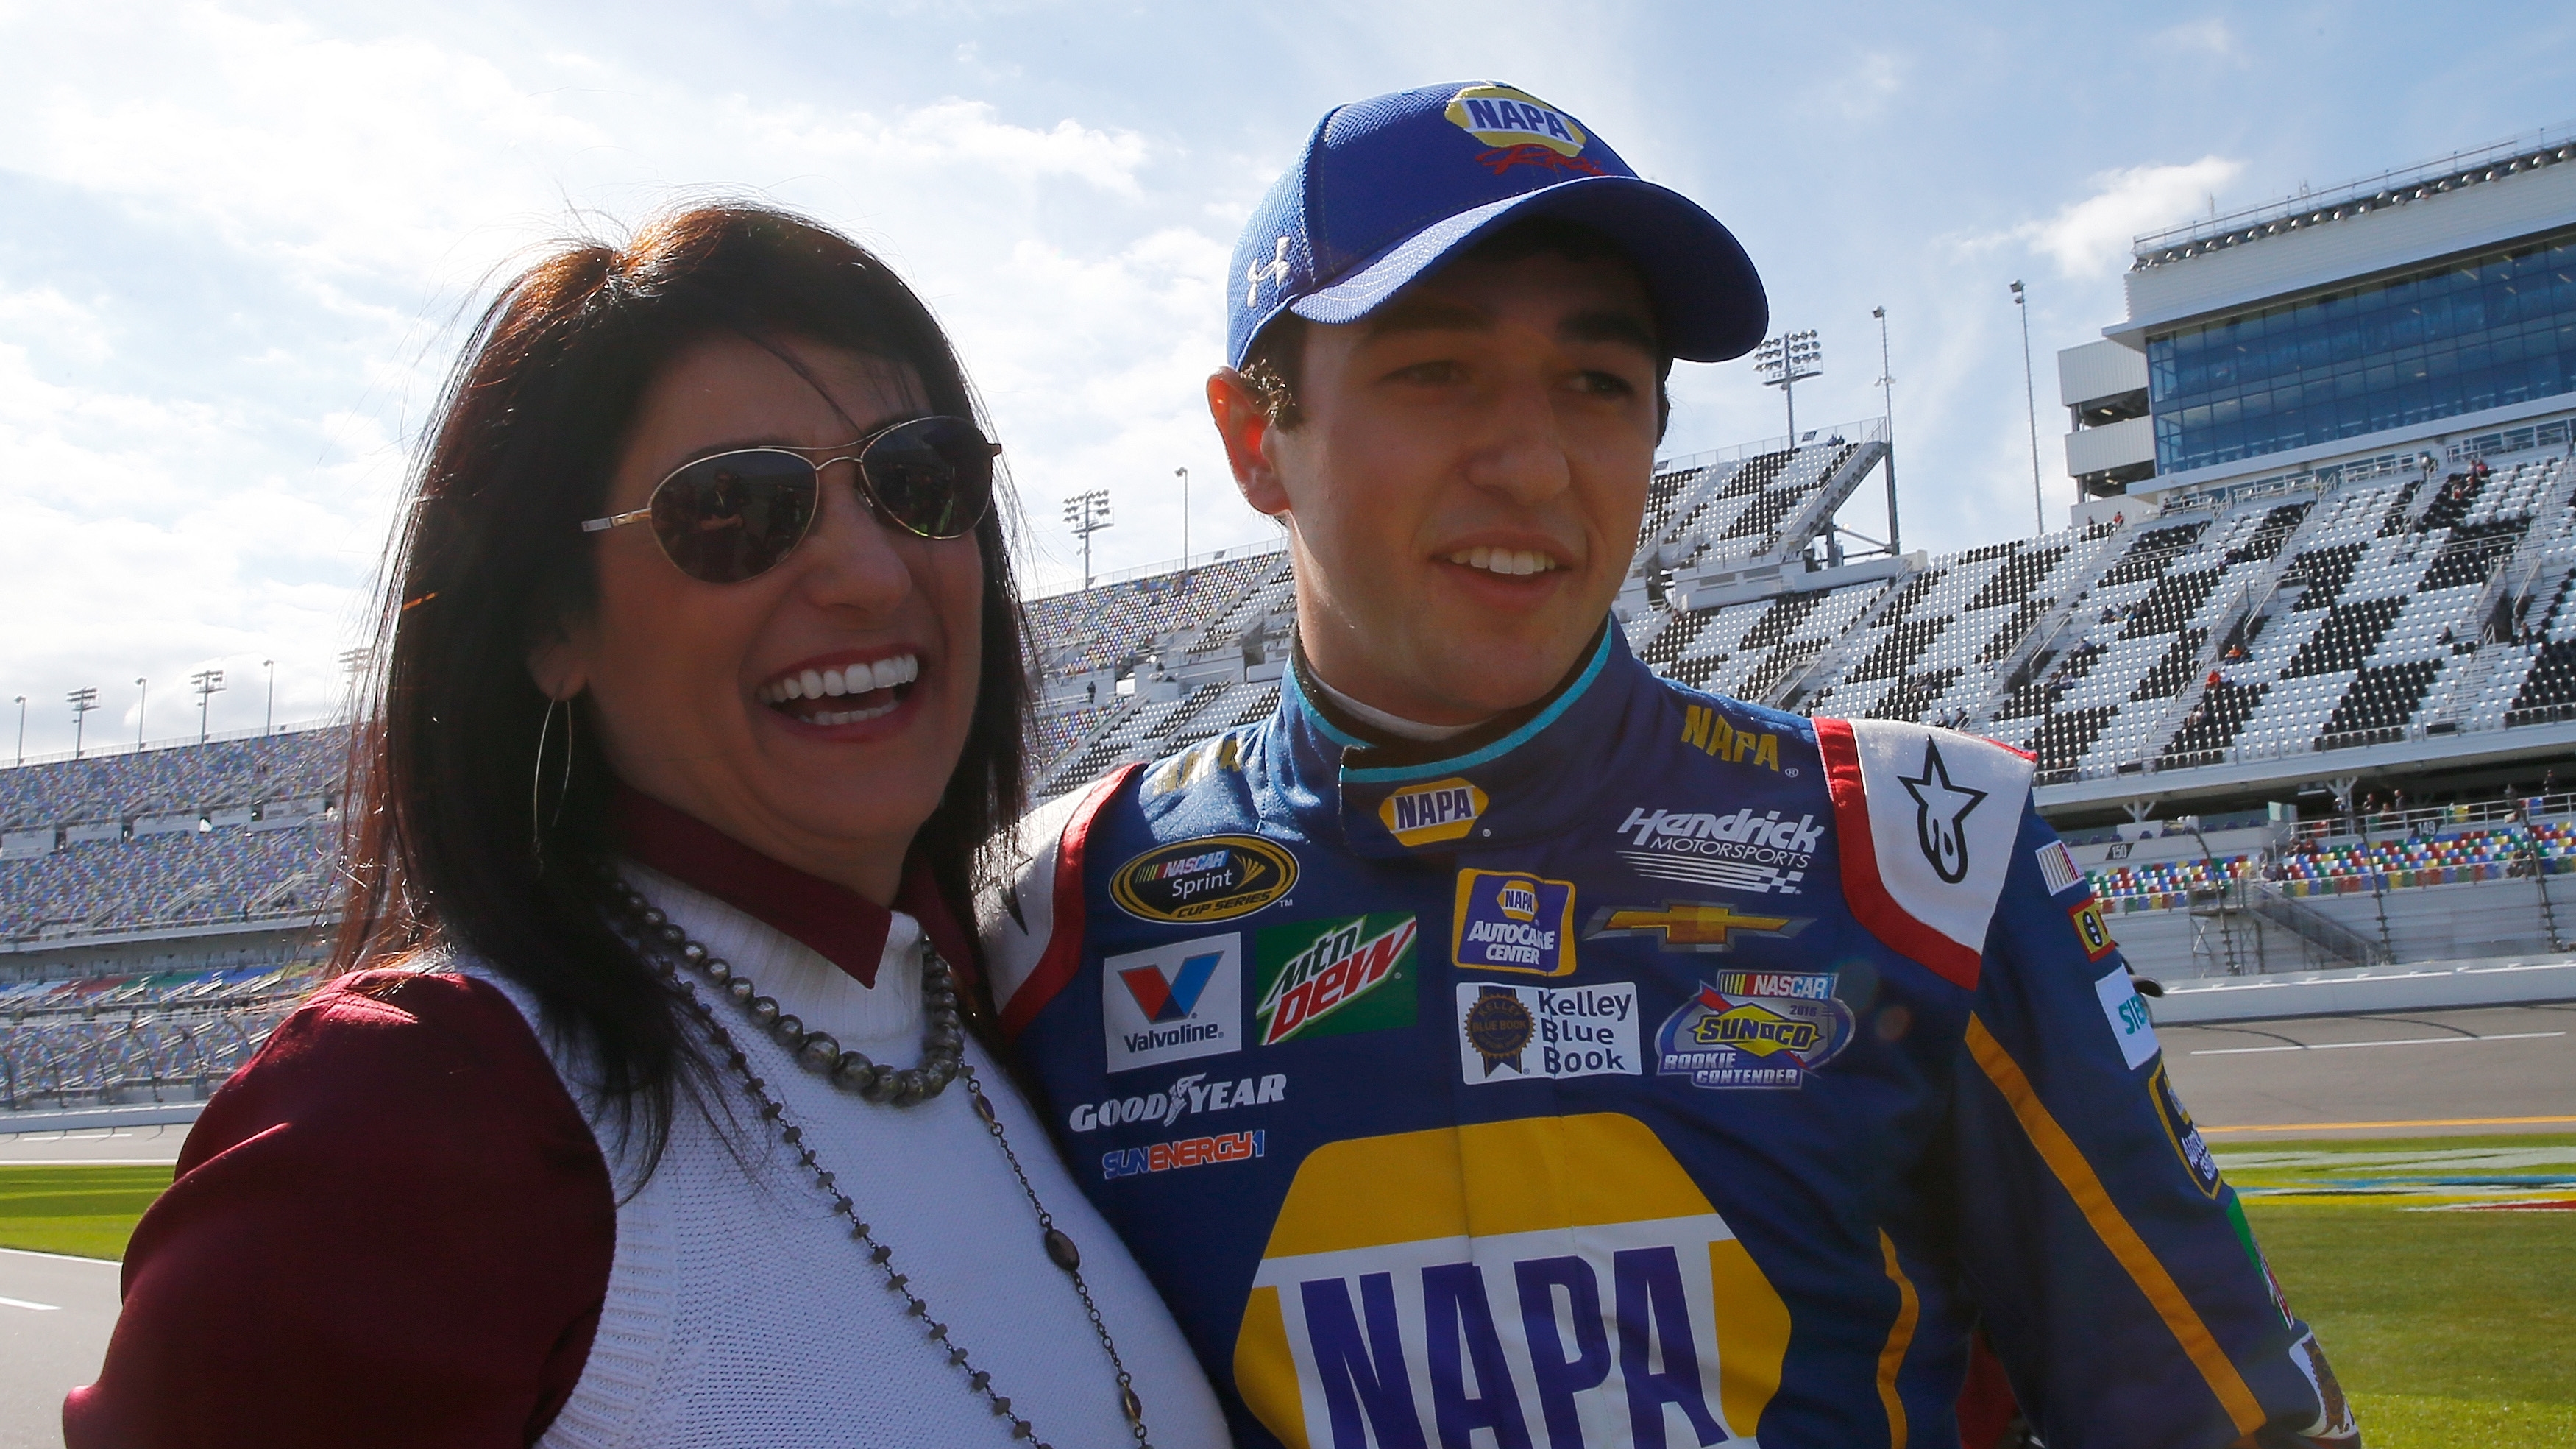 Happy Mother's Day from the NASCAR community